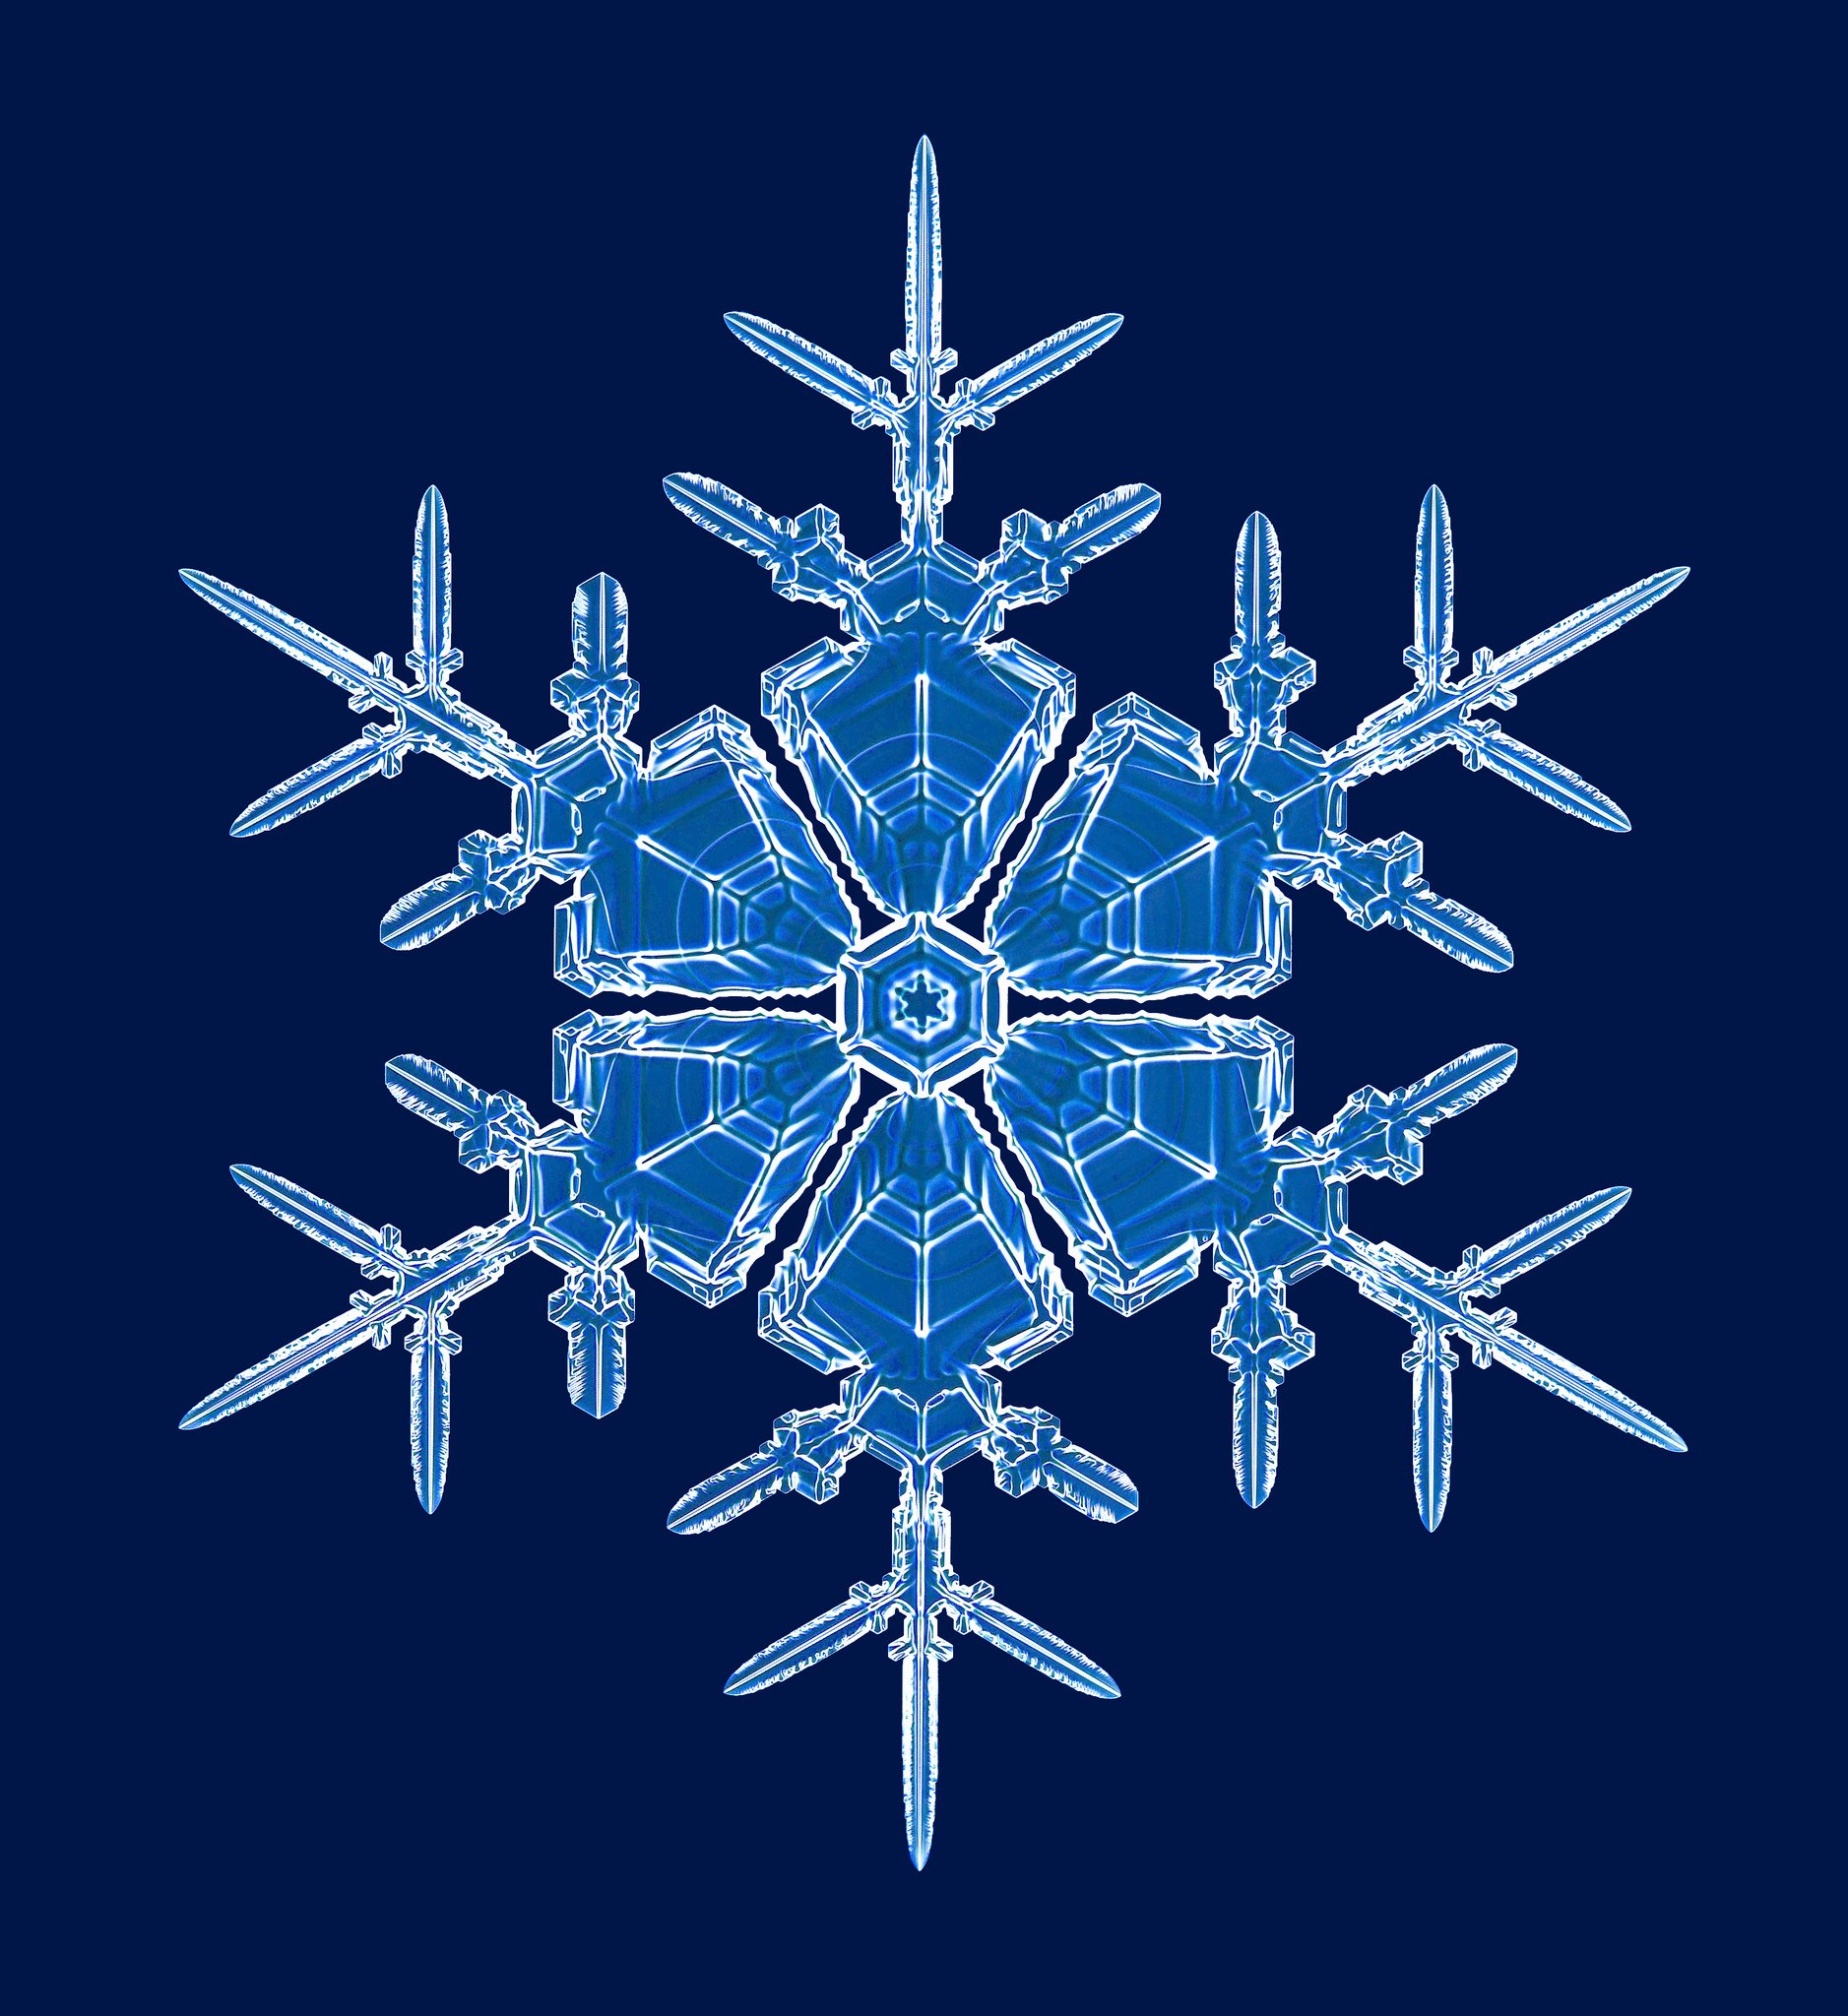 Kenneth Libbrecht: Photographing Lab-Made Snowflakes